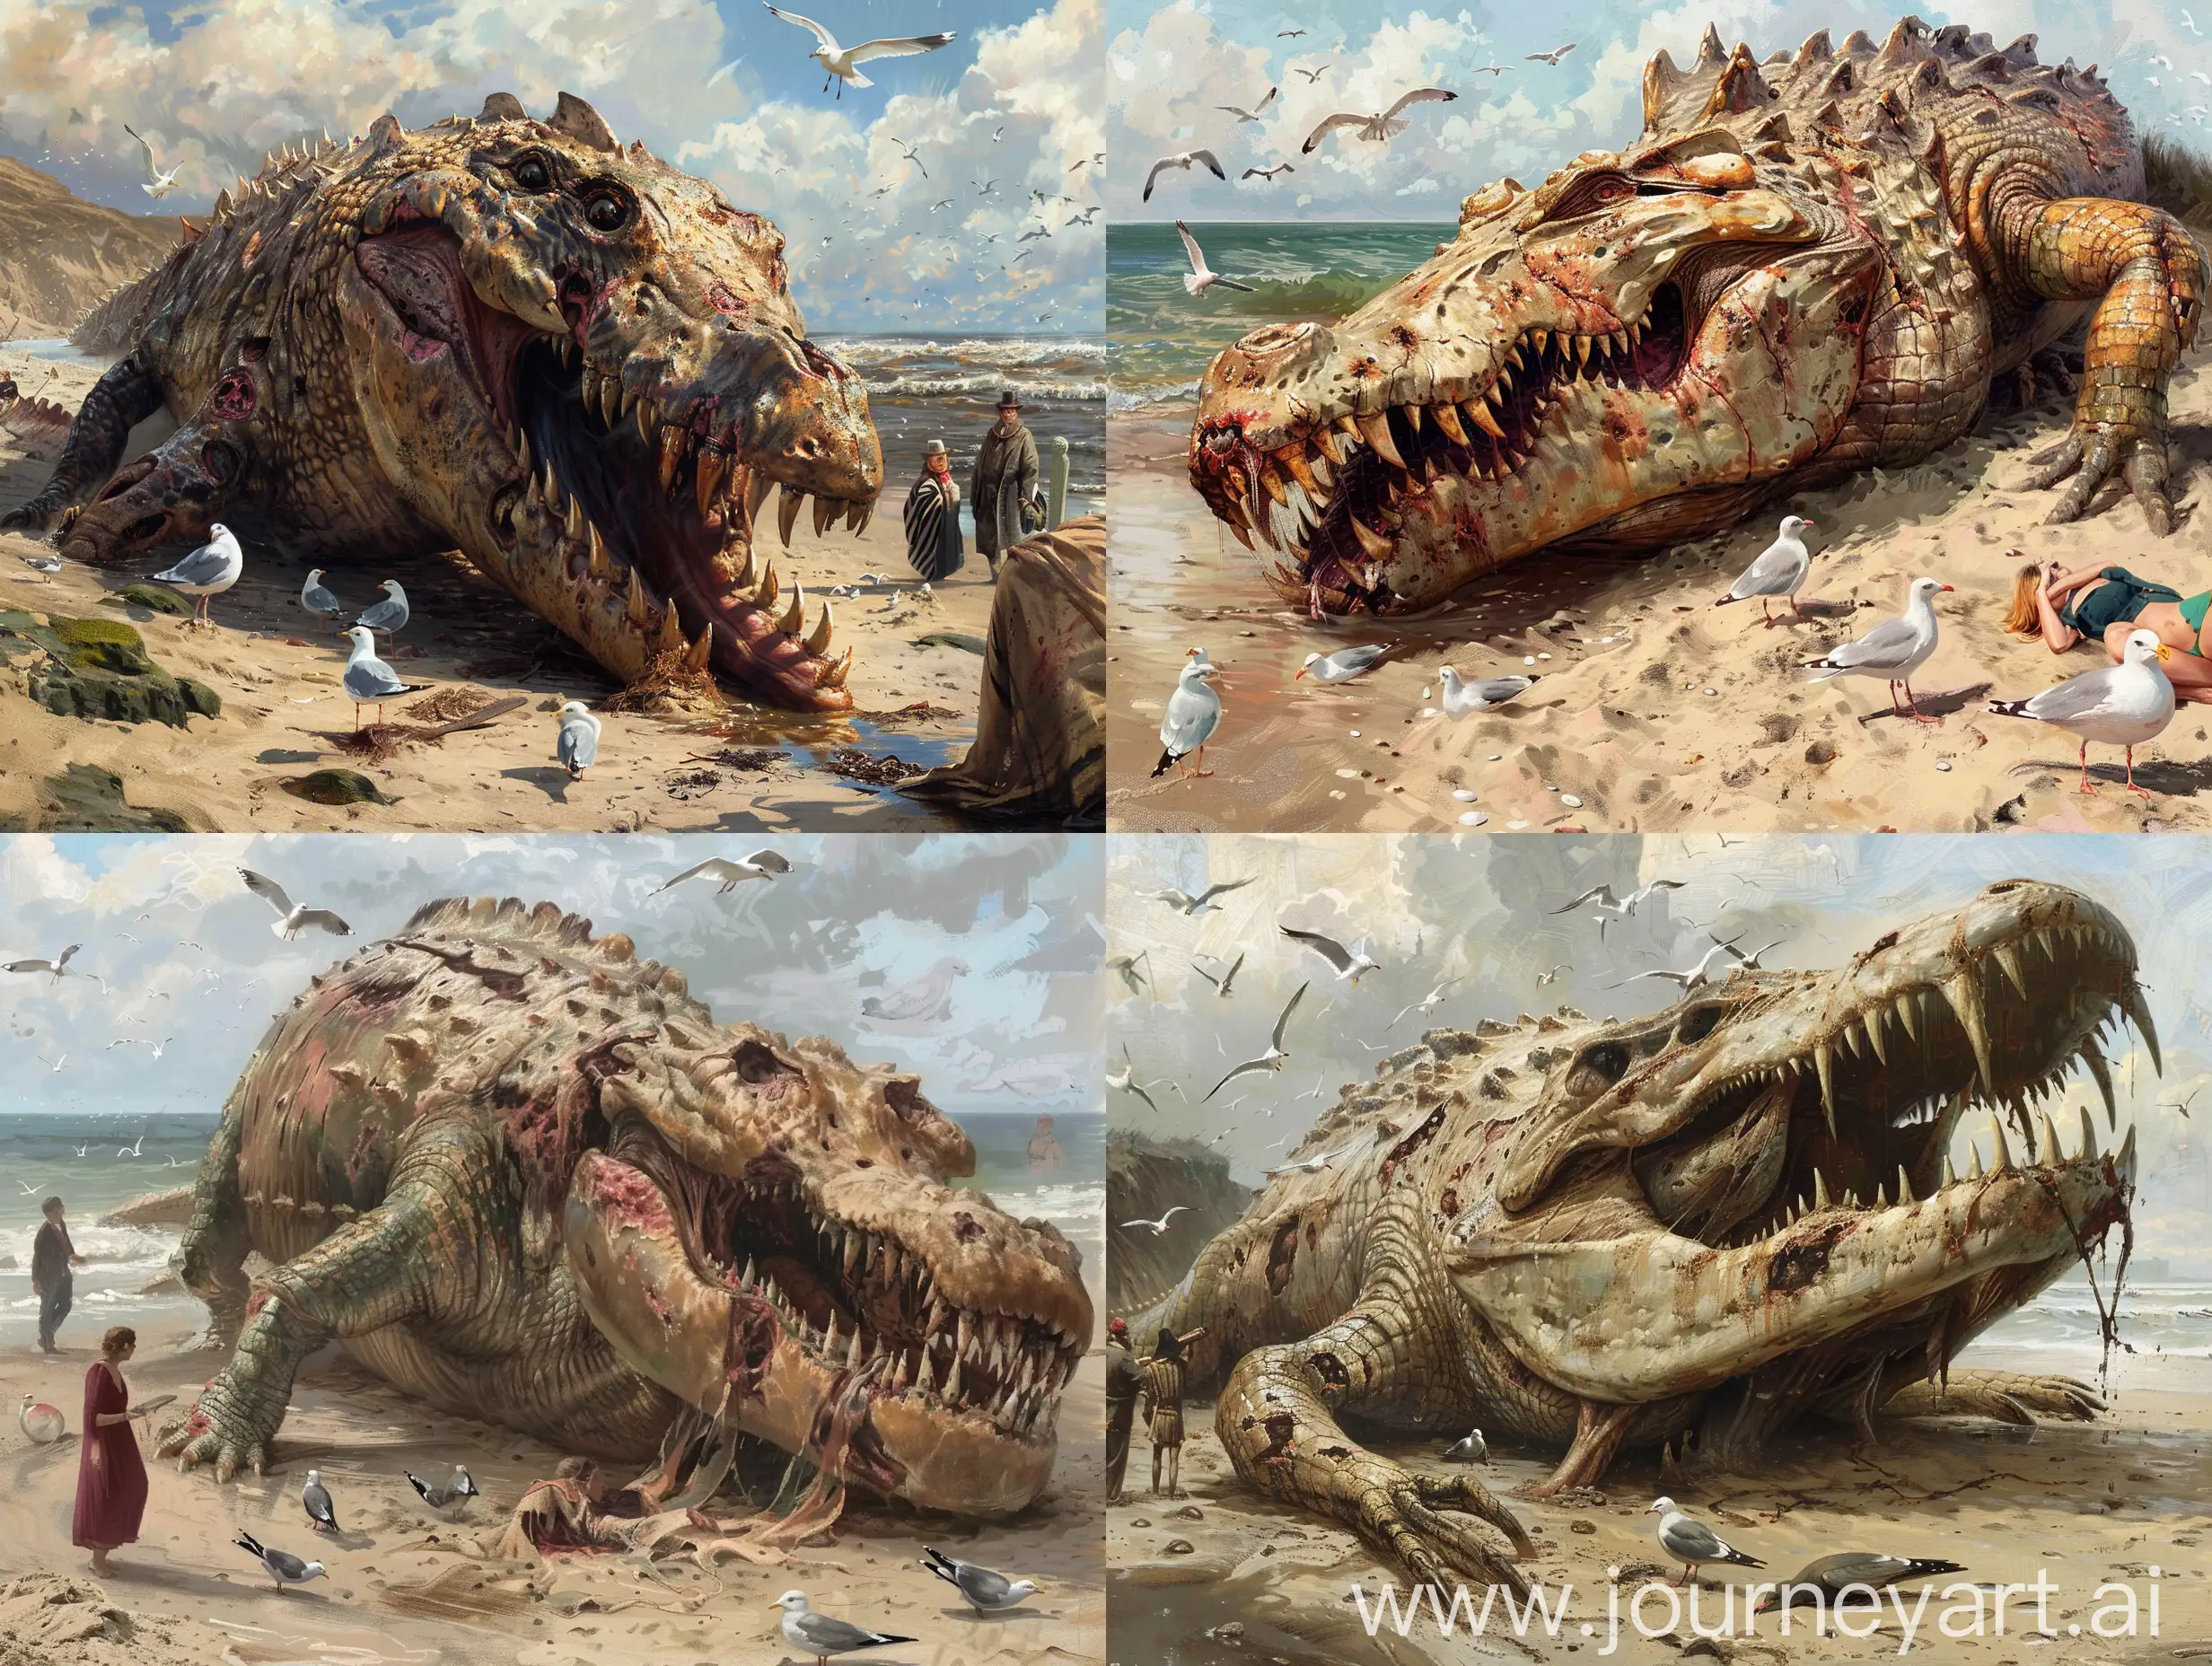  Beached decomposed carcass of crocodile-like kaiju with scarred rotten skin and huge teeth, surrounded by curious tourists and seagulls, early XX century, fantasy. 